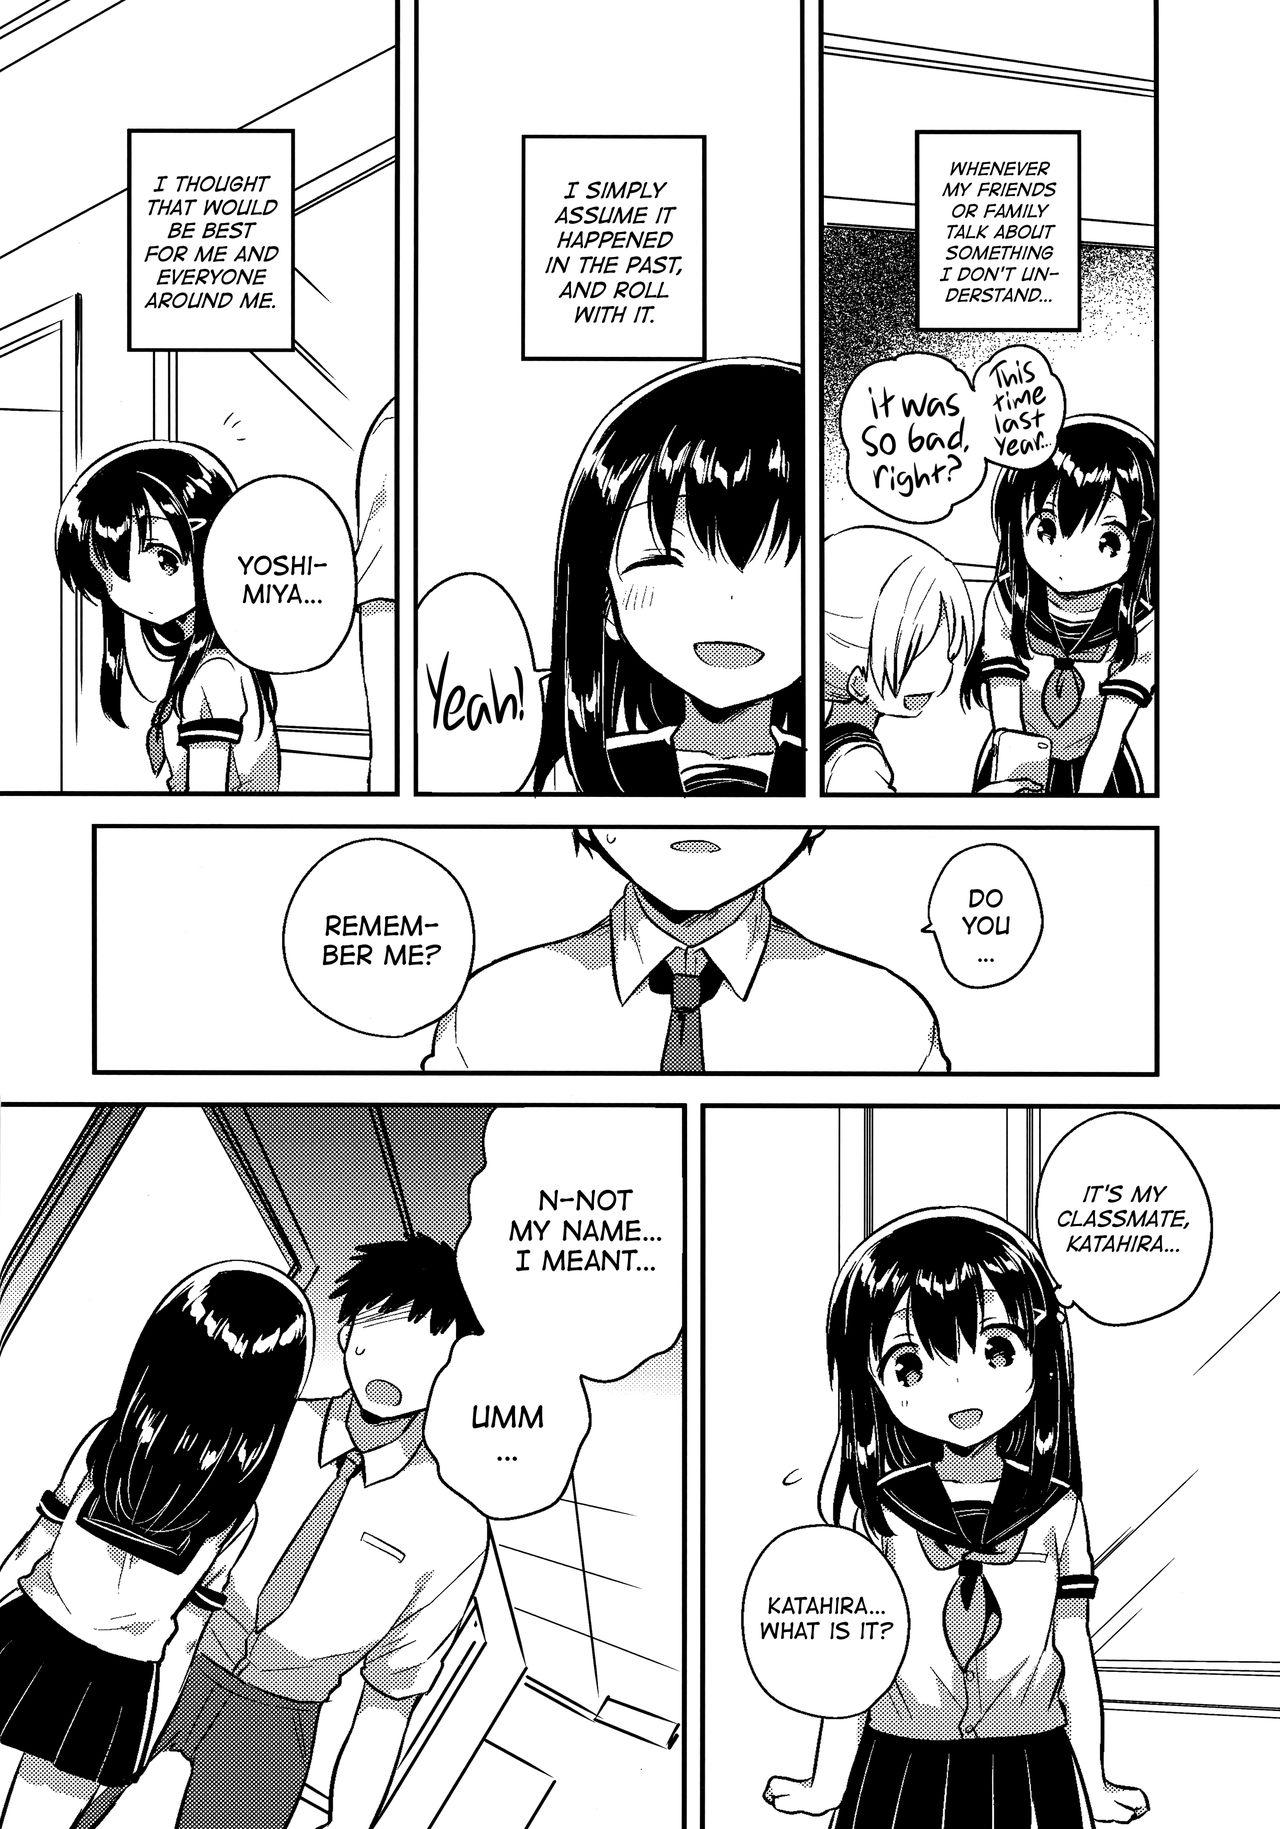 Squirting Imouto wa Amnesia close | My Little Sister Has Amnesia - close Ass - Page 2